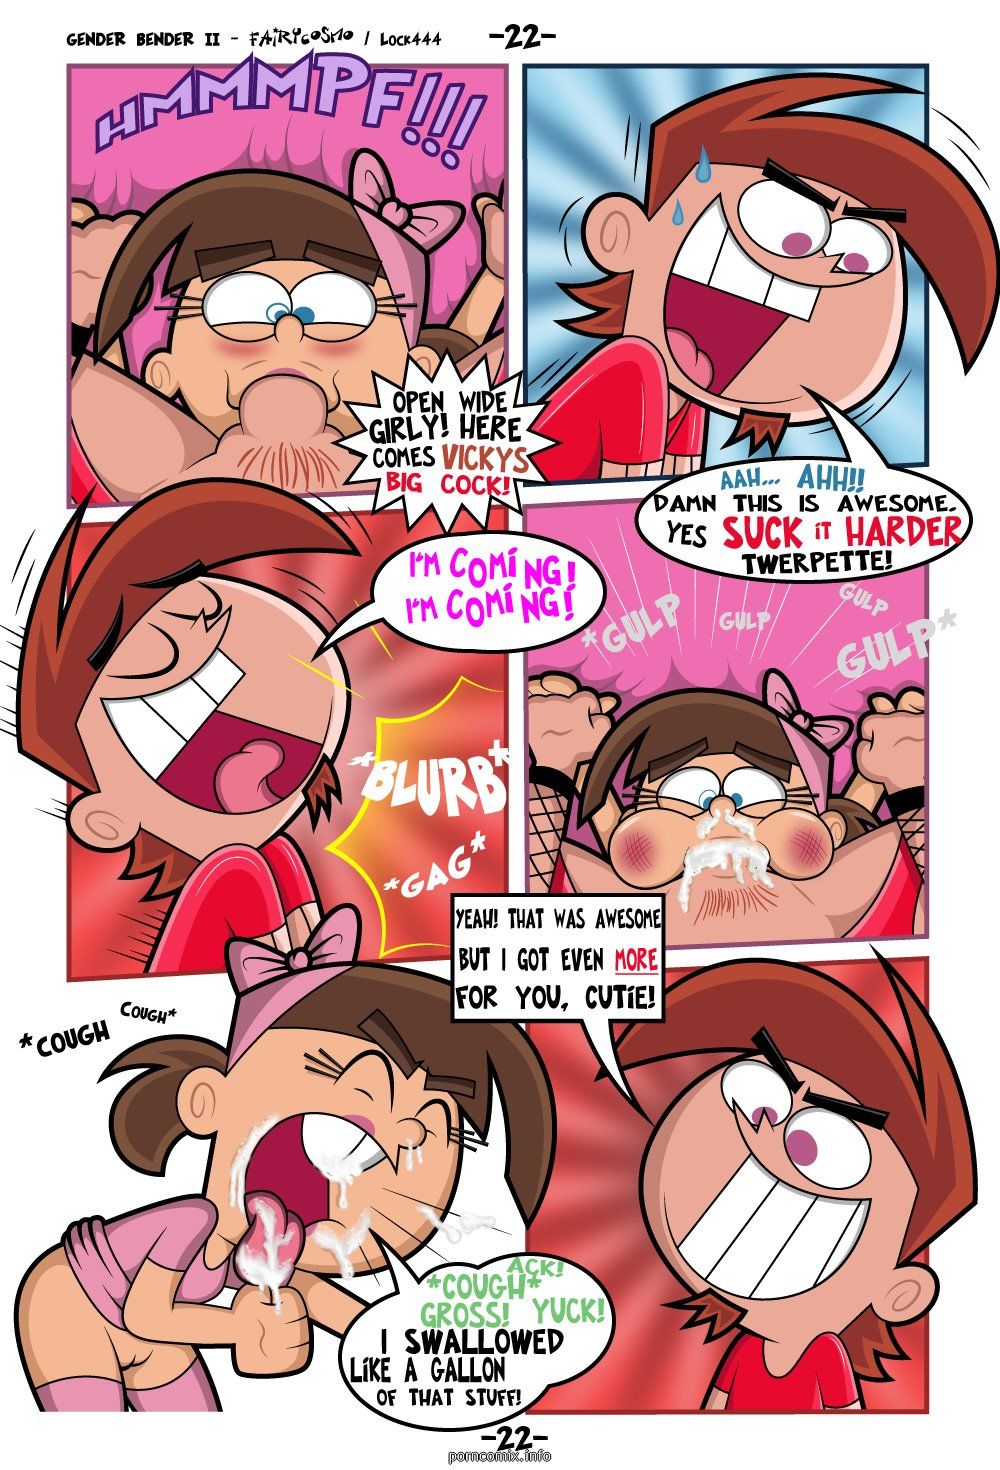 Fairly OddParents Gender Bender II [FairyCosmo] page 23